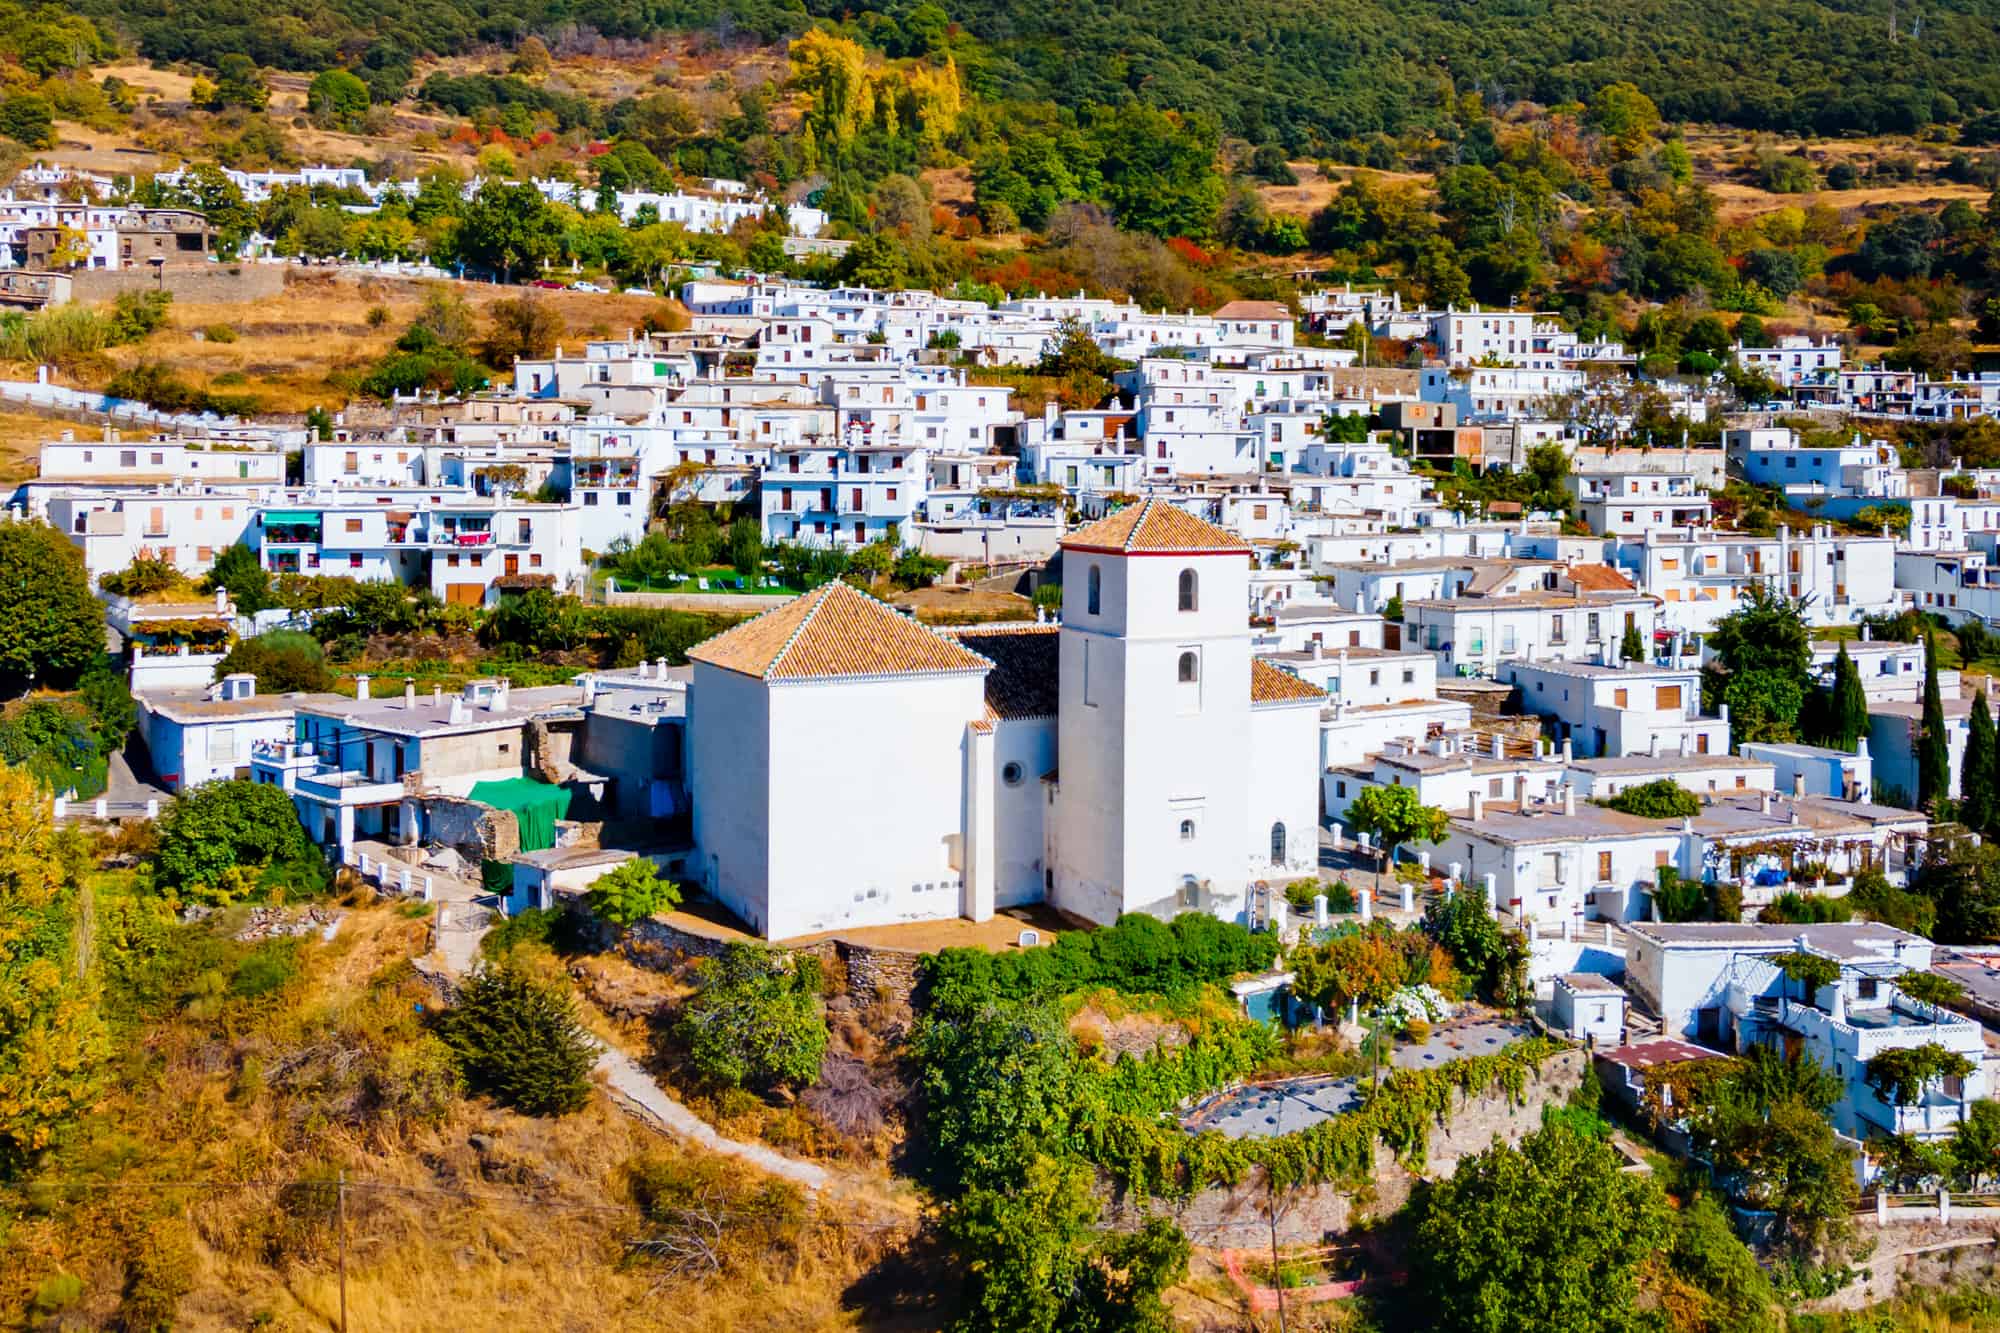 Our Lady of the Rosary Church aerial panoramic view in Bubion. Bubion is a village in the Alpujarras area in the province of Granada in Andalusia, Spain